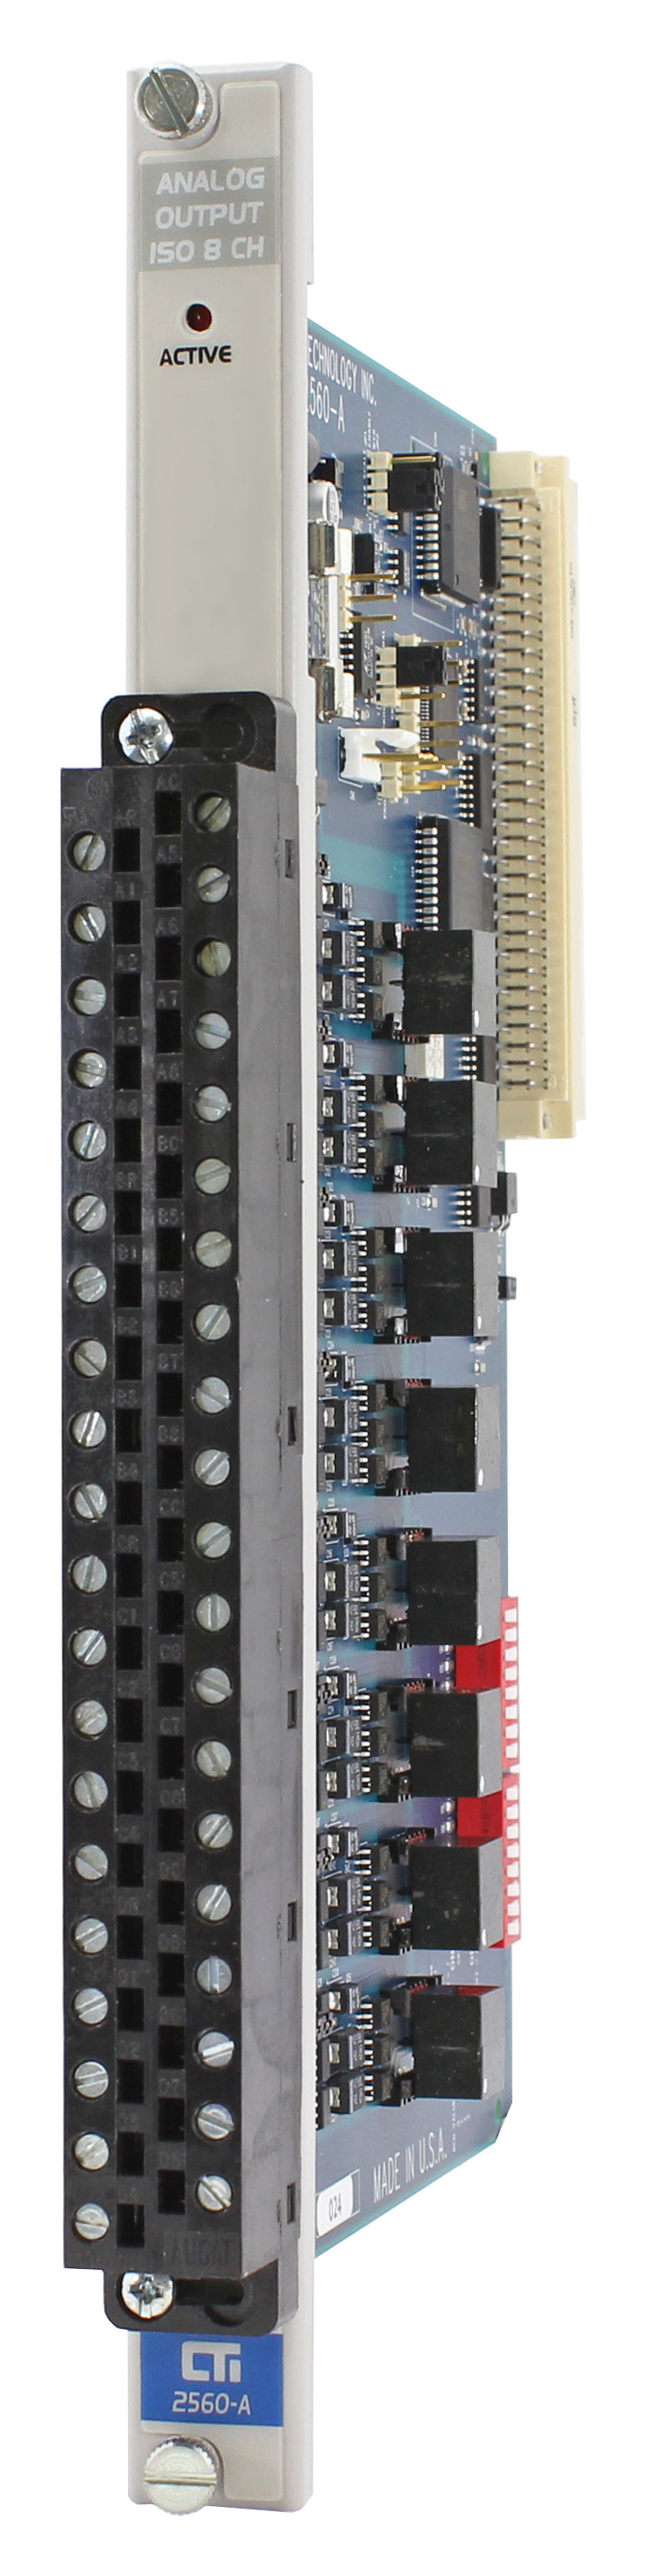 2560-A 8-Channel Isolated Analog Output Module